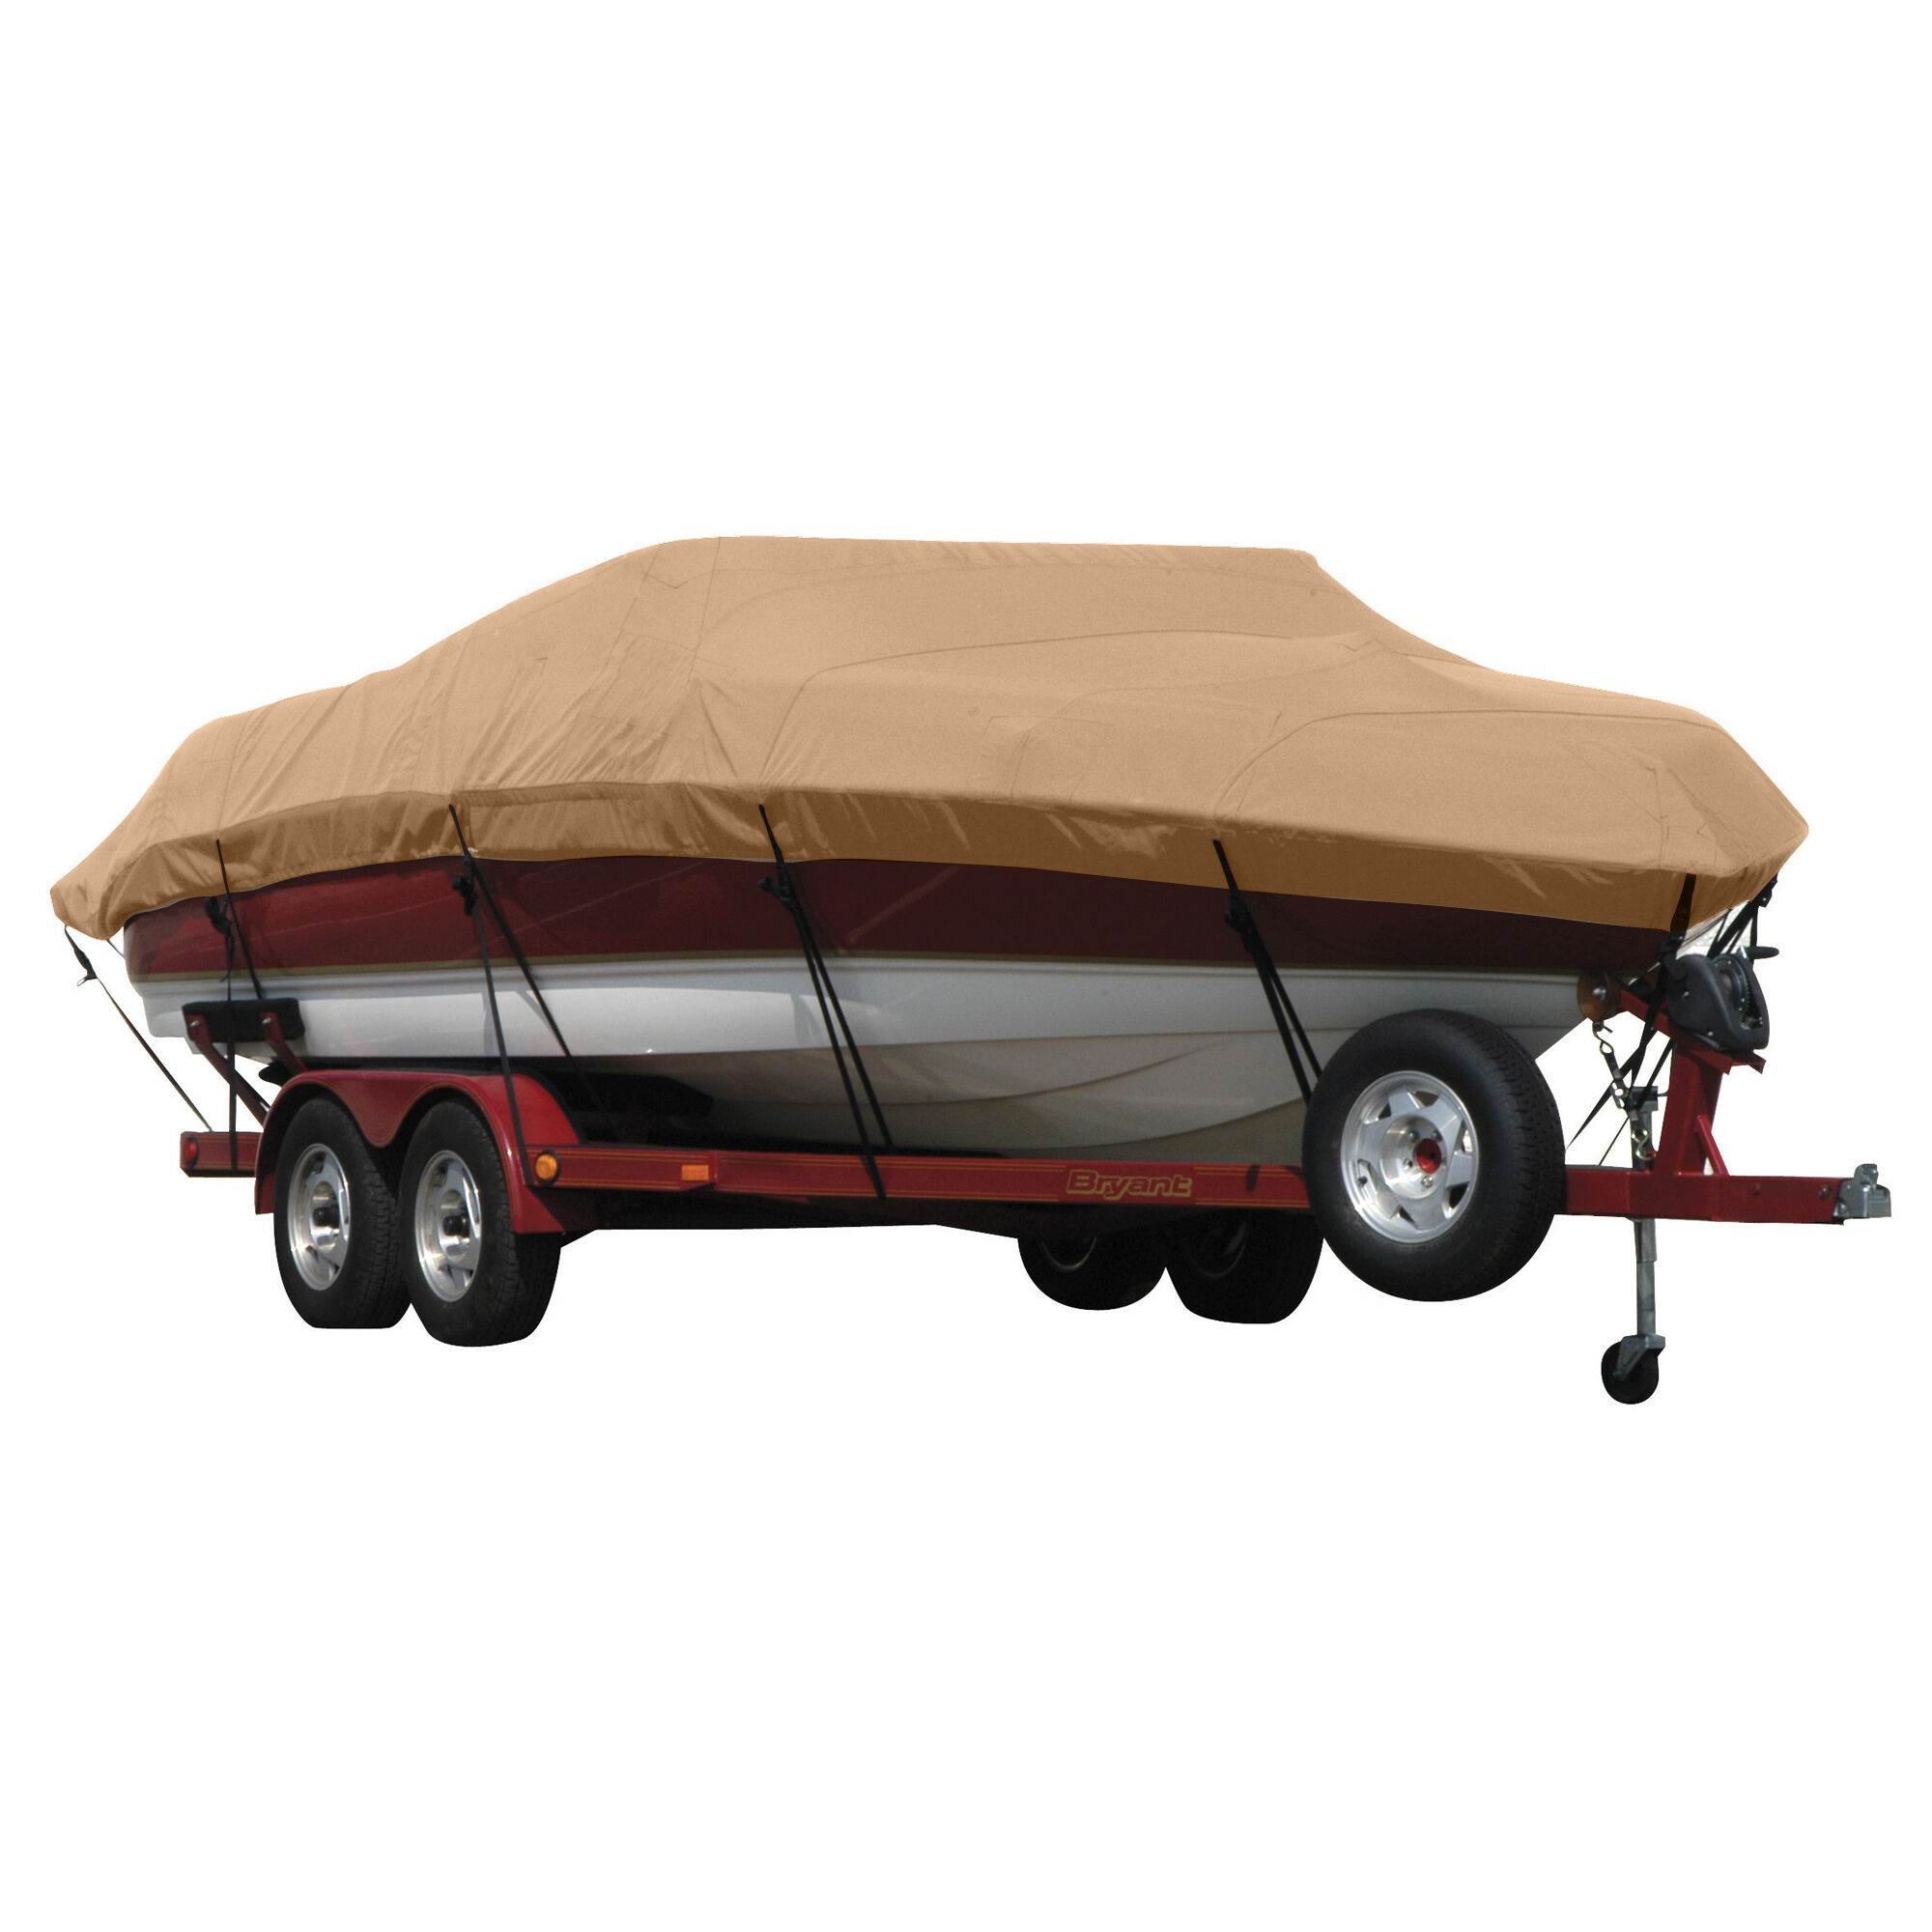 Covermate Exact Fit Sunbrella Boat Cover for Cobalt 303 303 Cruiser w/ Arch Cutouts Doesn't Cover Extended Swim Platform w/ Spot Light I/O. Beige